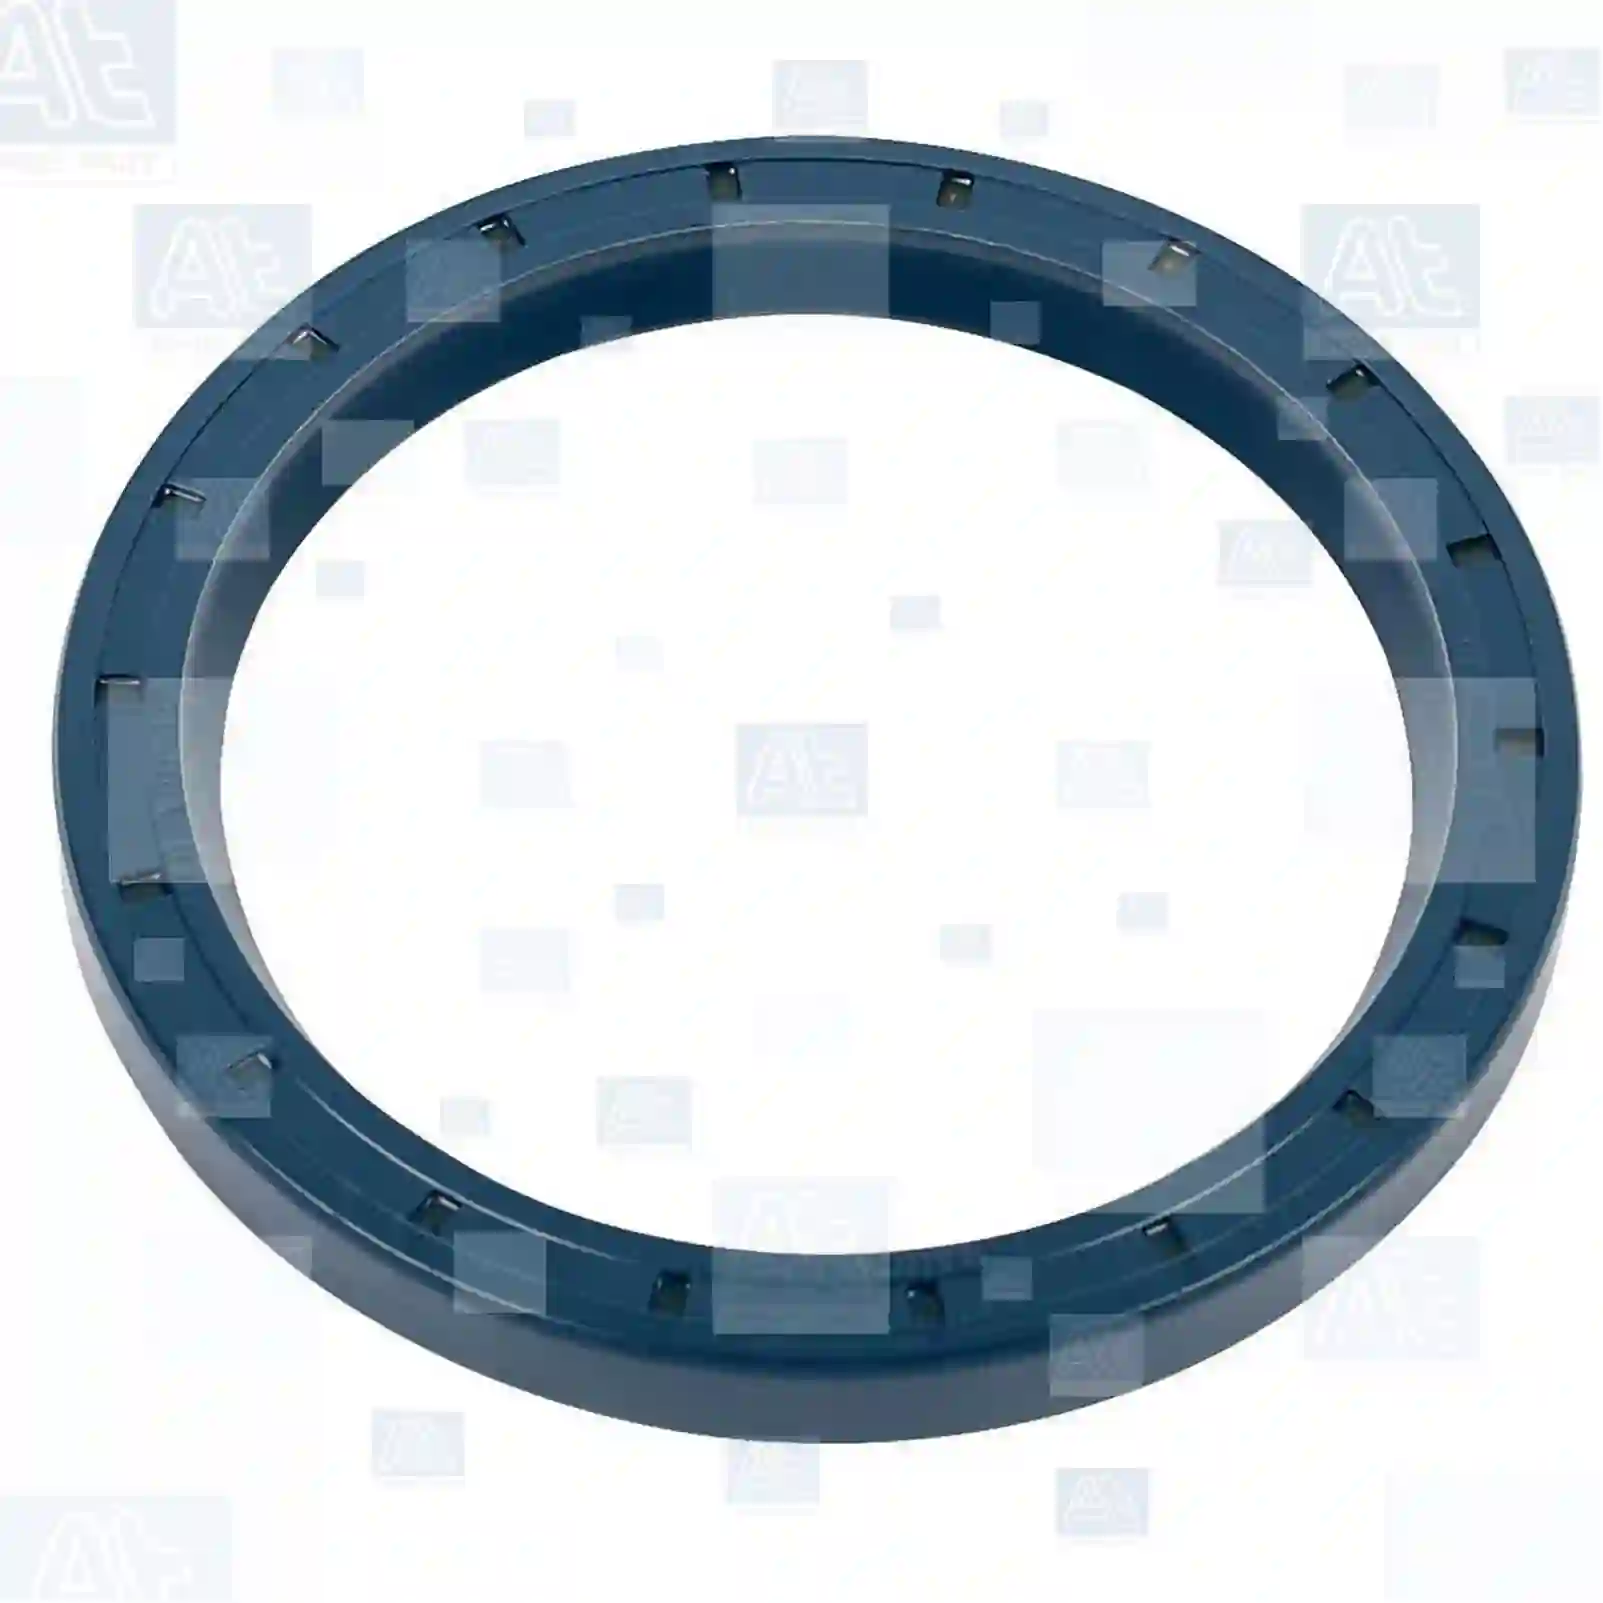 Oil seal, 77731627, 025315, 0002388880, 0572372, 1256592, 326571, 572372, 01160701, X550150400000, 38505699, 02981753, 02983039, 38505699, ER025315, 01160701, 06562800201, A0024411799, A0024411800, 976099M1, 0049979646, 0059971046, 006504080100, 0079978346, 00375400, 0003207402, 0024411799, 0024411800, 215100410, 120979, 959042 ||  77731627 At Spare Part | Engine, Accelerator Pedal, Camshaft, Connecting Rod, Crankcase, Crankshaft, Cylinder Head, Engine Suspension Mountings, Exhaust Manifold, Exhaust Gas Recirculation, Filter Kits, Flywheel Housing, General Overhaul Kits, Engine, Intake Manifold, Oil Cleaner, Oil Cooler, Oil Filter, Oil Pump, Oil Sump, Piston & Liner, Sensor & Switch, Timing Case, Turbocharger, Cooling System, Belt Tensioner, Coolant Filter, Coolant Pipe, Corrosion Prevention Agent, Drive, Expansion Tank, Fan, Intercooler, Monitors & Gauges, Radiator, Thermostat, V-Belt / Timing belt, Water Pump, Fuel System, Electronical Injector Unit, Feed Pump, Fuel Filter, cpl., Fuel Gauge Sender,  Fuel Line, Fuel Pump, Fuel Tank, Injection Line Kit, Injection Pump, Exhaust System, Clutch & Pedal, Gearbox, Propeller Shaft, Axles, Brake System, Hubs & Wheels, Suspension, Leaf Spring, Universal Parts / Accessories, Steering, Electrical System, Cabin Oil seal, 77731627, 025315, 0002388880, 0572372, 1256592, 326571, 572372, 01160701, X550150400000, 38505699, 02981753, 02983039, 38505699, ER025315, 01160701, 06562800201, A0024411799, A0024411800, 976099M1, 0049979646, 0059971046, 006504080100, 0079978346, 00375400, 0003207402, 0024411799, 0024411800, 215100410, 120979, 959042 ||  77731627 At Spare Part | Engine, Accelerator Pedal, Camshaft, Connecting Rod, Crankcase, Crankshaft, Cylinder Head, Engine Suspension Mountings, Exhaust Manifold, Exhaust Gas Recirculation, Filter Kits, Flywheel Housing, General Overhaul Kits, Engine, Intake Manifold, Oil Cleaner, Oil Cooler, Oil Filter, Oil Pump, Oil Sump, Piston & Liner, Sensor & Switch, Timing Case, Turbocharger, Cooling System, Belt Tensioner, Coolant Filter, Coolant Pipe, Corrosion Prevention Agent, Drive, Expansion Tank, Fan, Intercooler, Monitors & Gauges, Radiator, Thermostat, V-Belt / Timing belt, Water Pump, Fuel System, Electronical Injector Unit, Feed Pump, Fuel Filter, cpl., Fuel Gauge Sender,  Fuel Line, Fuel Pump, Fuel Tank, Injection Line Kit, Injection Pump, Exhaust System, Clutch & Pedal, Gearbox, Propeller Shaft, Axles, Brake System, Hubs & Wheels, Suspension, Leaf Spring, Universal Parts / Accessories, Steering, Electrical System, Cabin